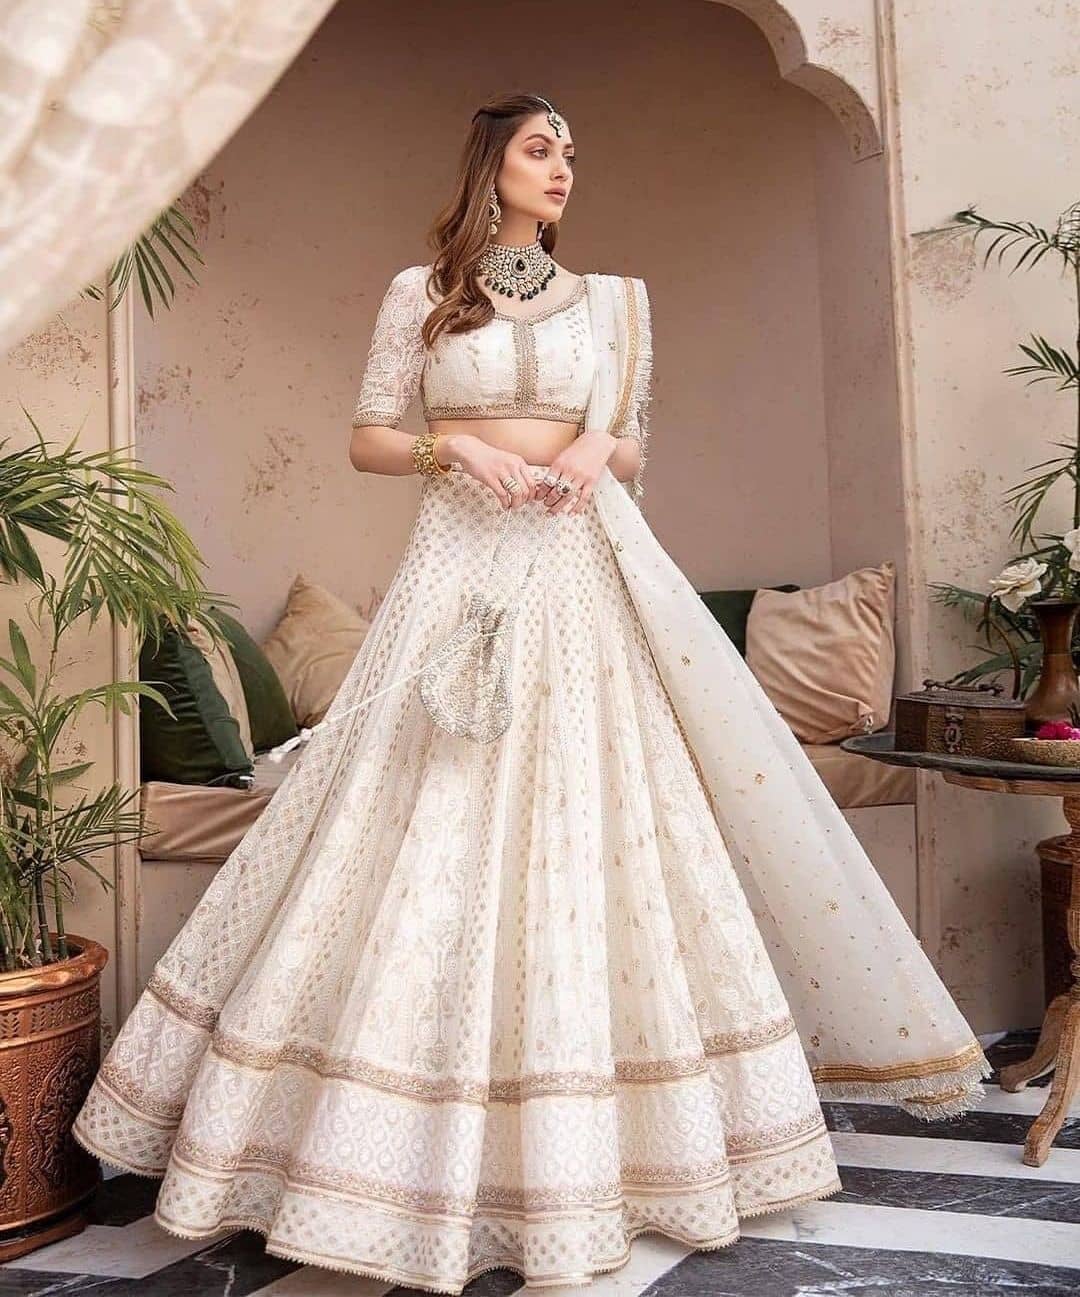 Fabfind: Regal Bridal Lehengas That We Are Hooked On - Get Inspiring Ideas  for Planning Your Perfect Wedding at fabweddings